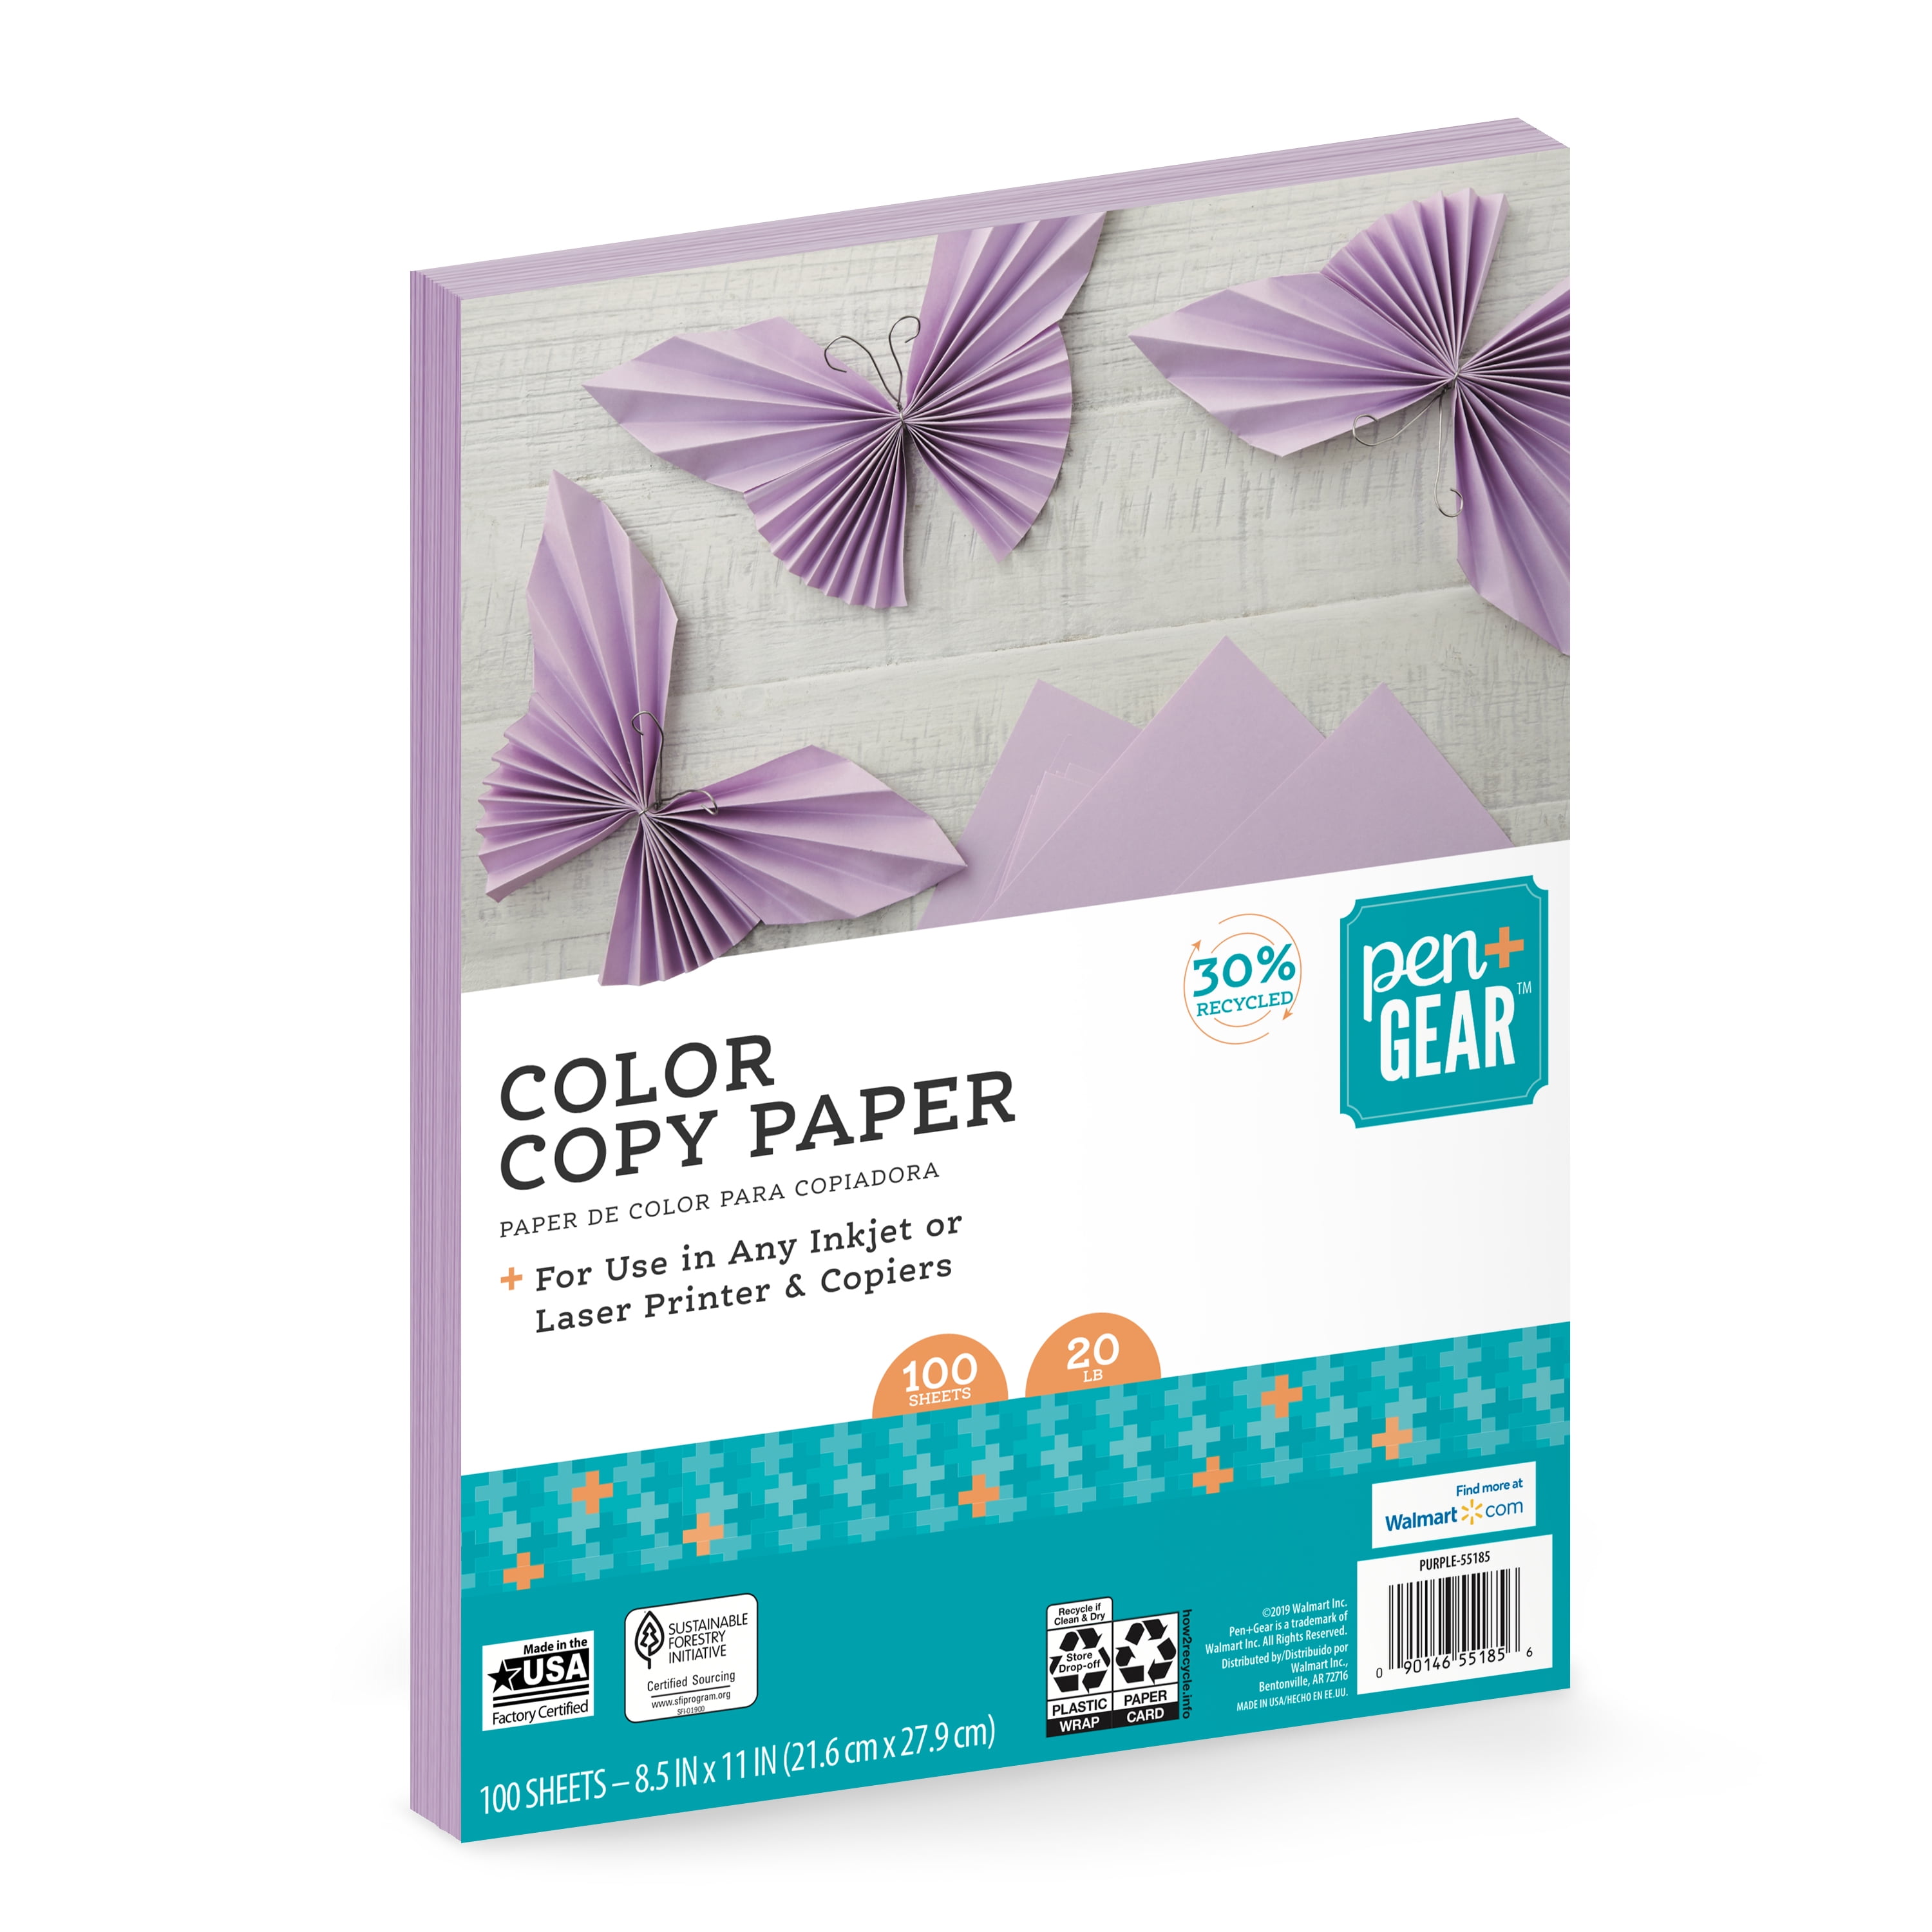  MECCANIXITY 100 Sheets Colored Copy Paper 8 1/2 Inch Printer  Paper 22lb/80gsm Light Purple for Office Printing, Document Copying,  Invitations, Forms, Art Projects : מוצרים למשרד